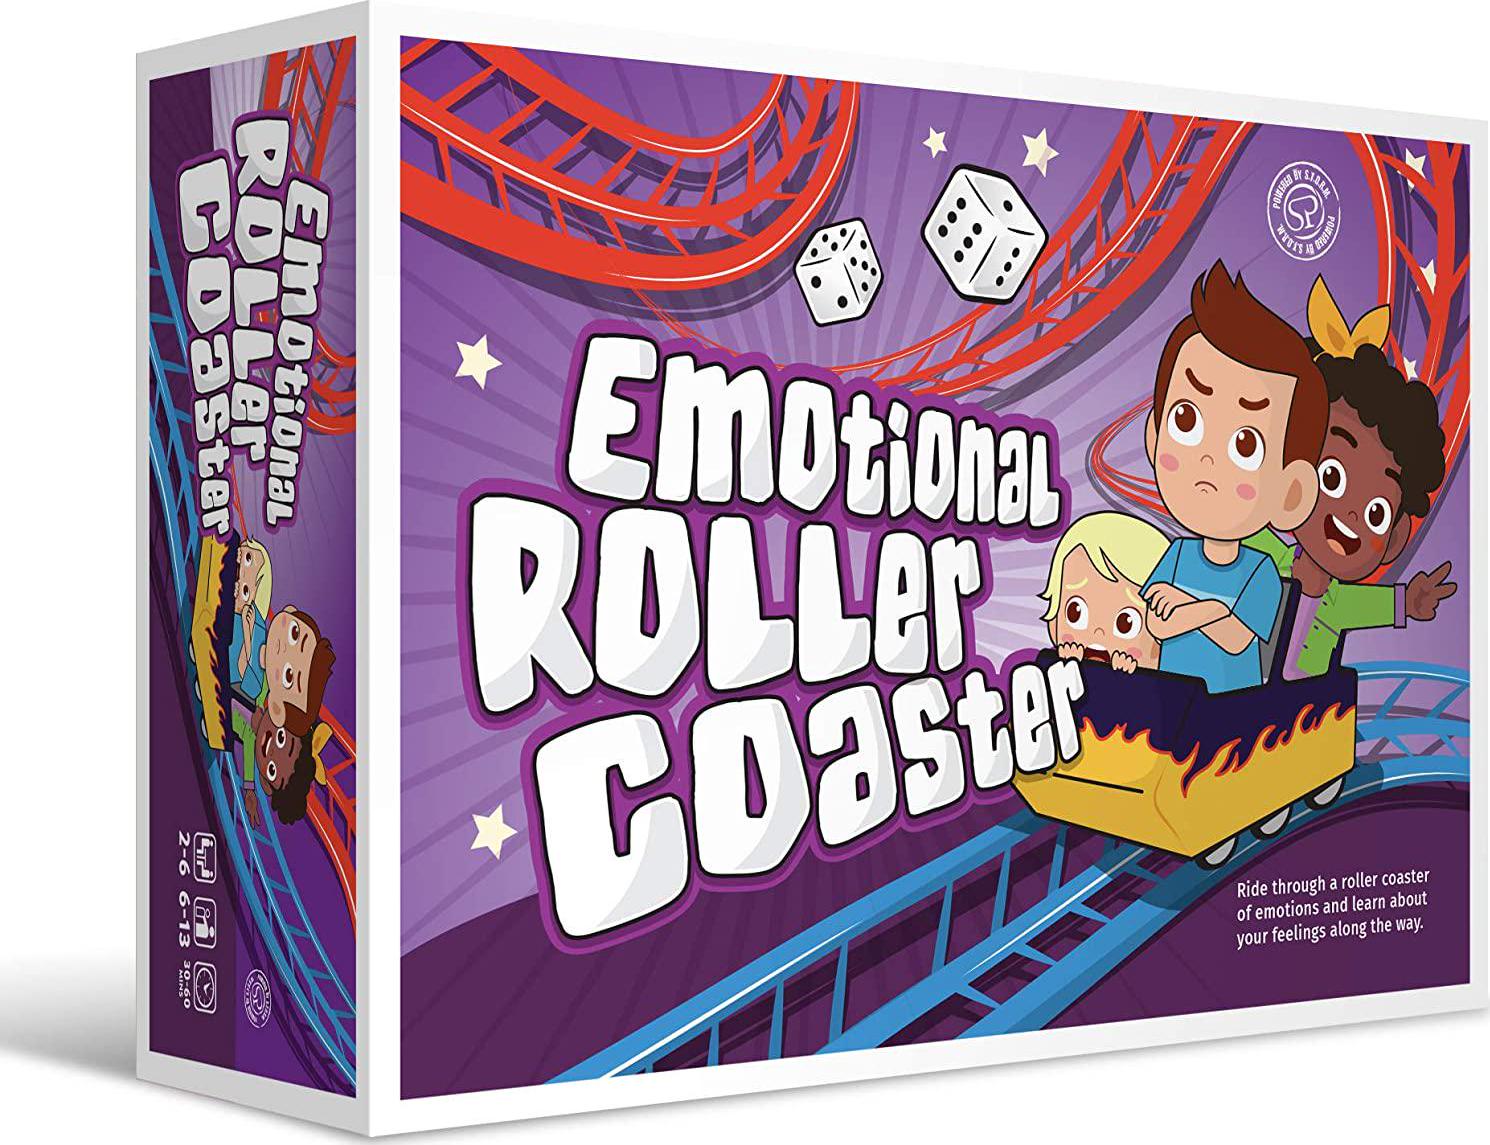 S.T.O.R.M., Emotional Rollercoaster | Anger Management Board Game for Kids and Families | Therapy Learning Resources | Anger Control Card Game | Emotion Board Games Games for Kids Ages 4-8 -12 | Social Emotional